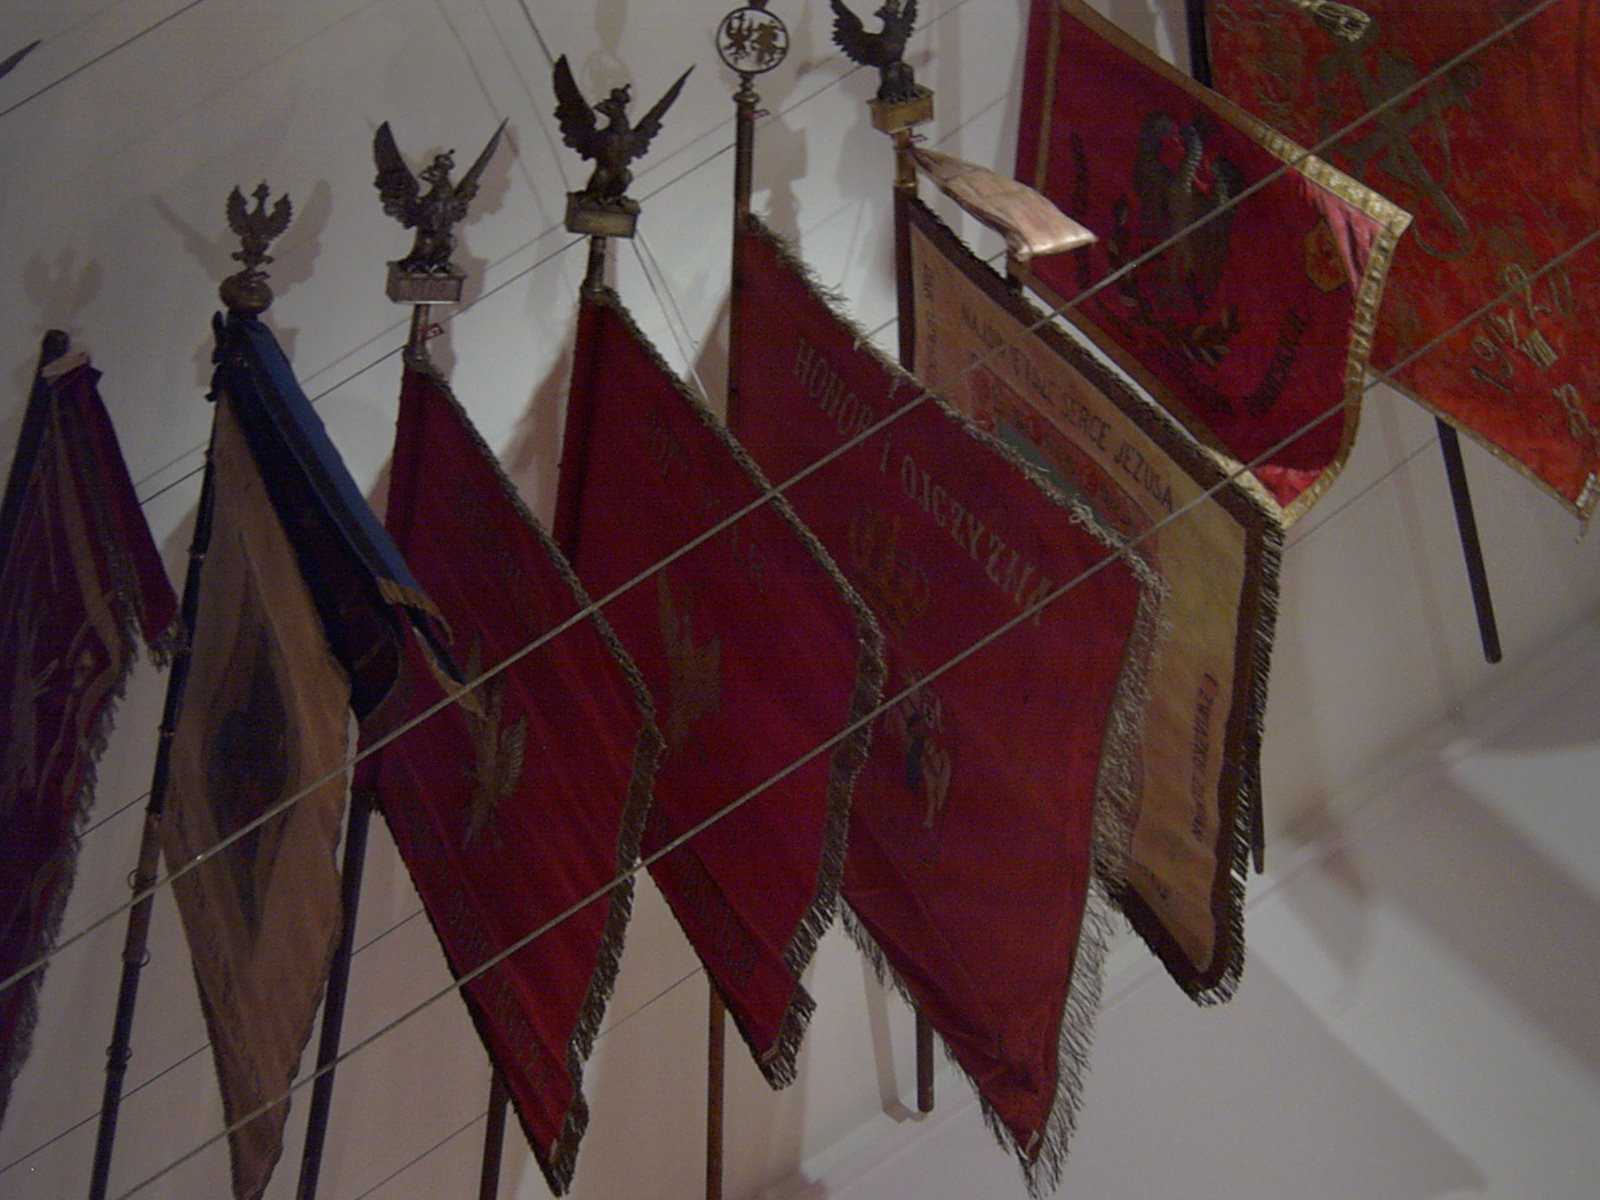 Collected Polish flags